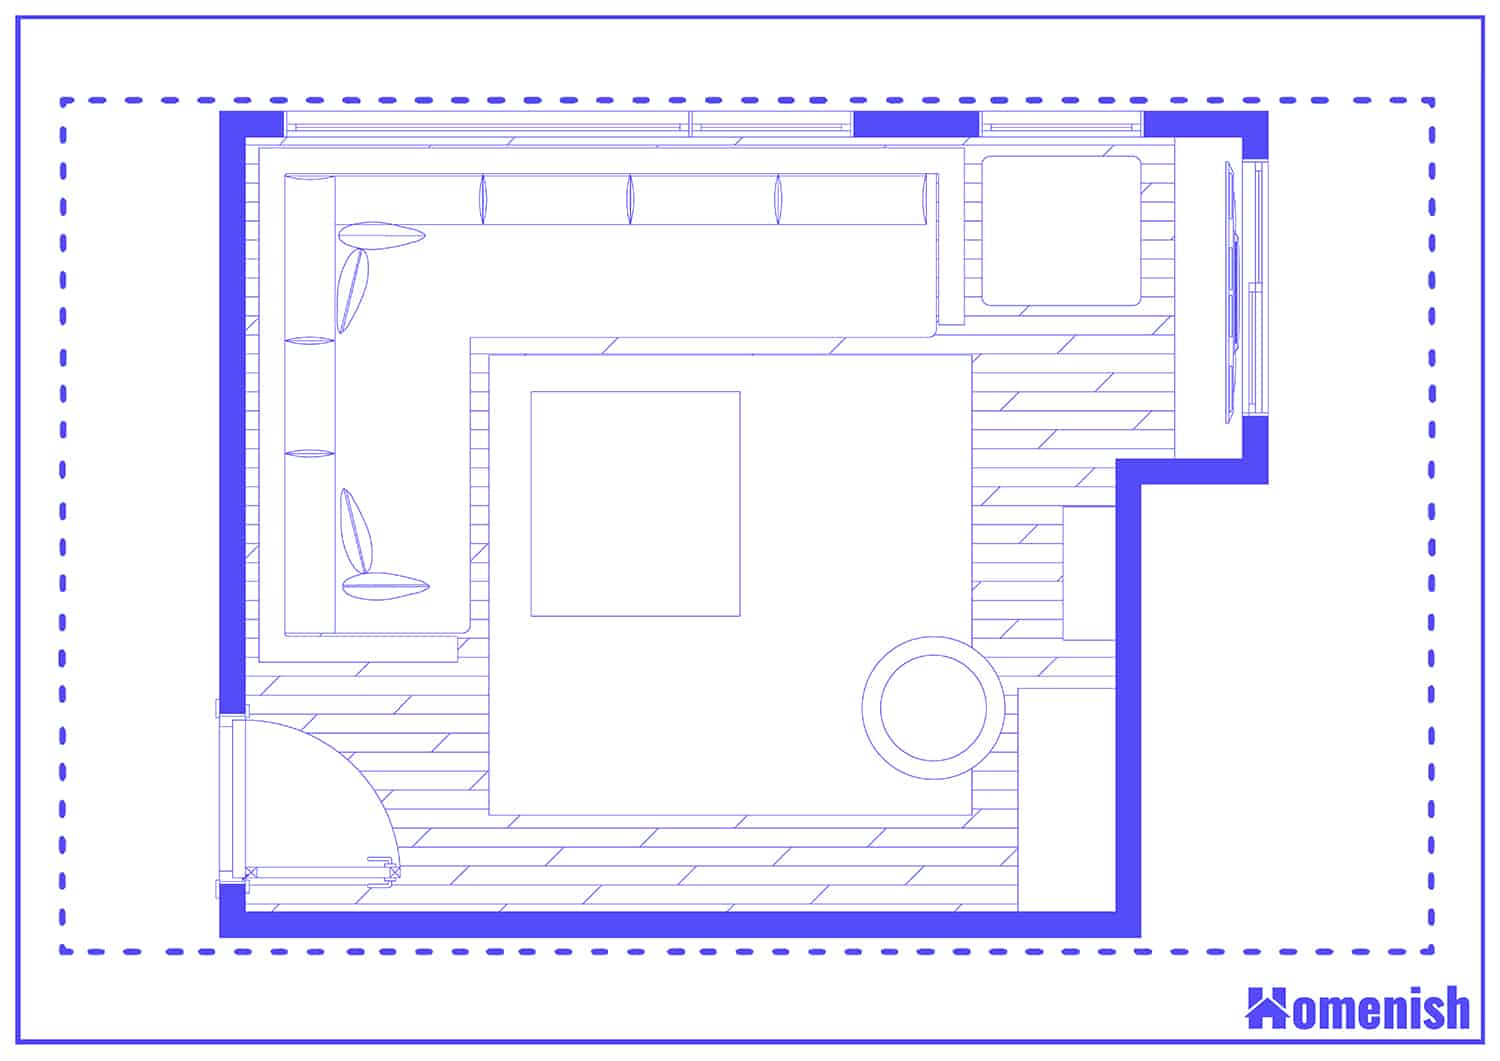 Monochrome Lounge with Corner Couch floor Plan